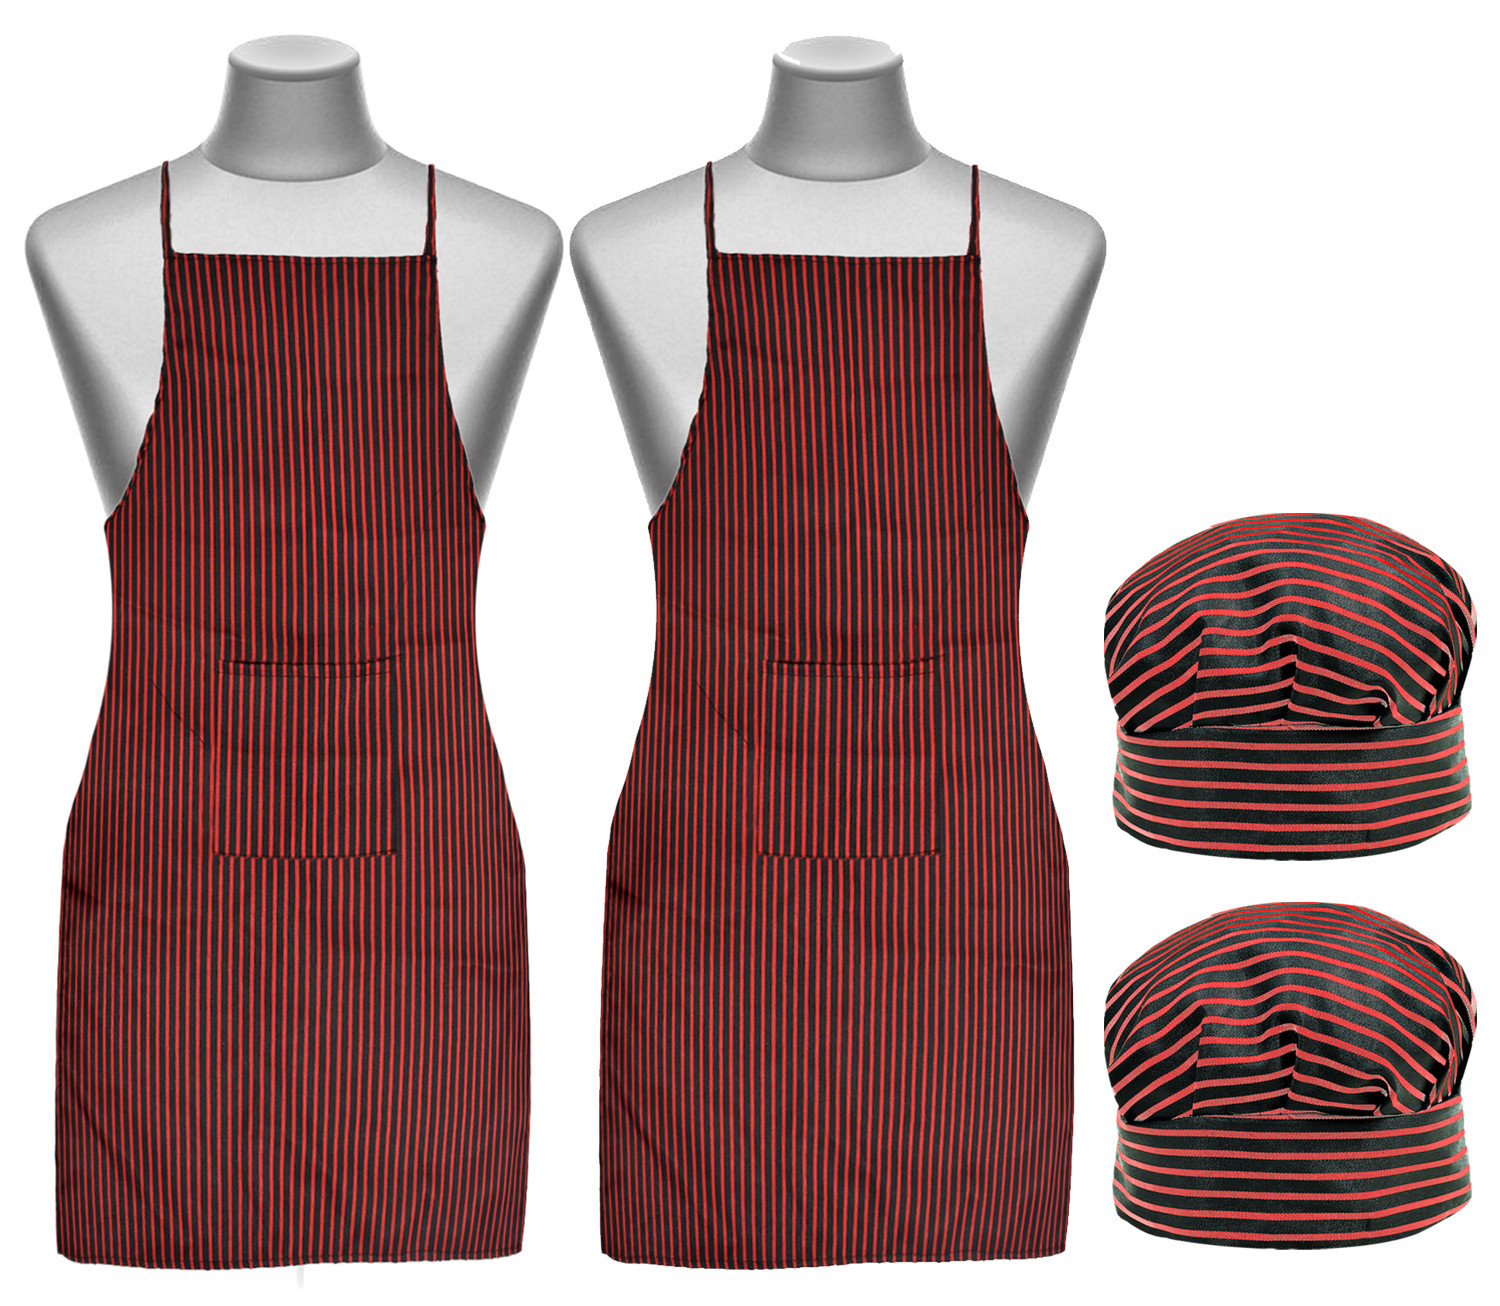 Kuber Industries Linning Printed Apron & Cooking Cap Set For Cooking, Baking, Party Favors, Home Kitchen, Restaurant, (Black & Maroon)